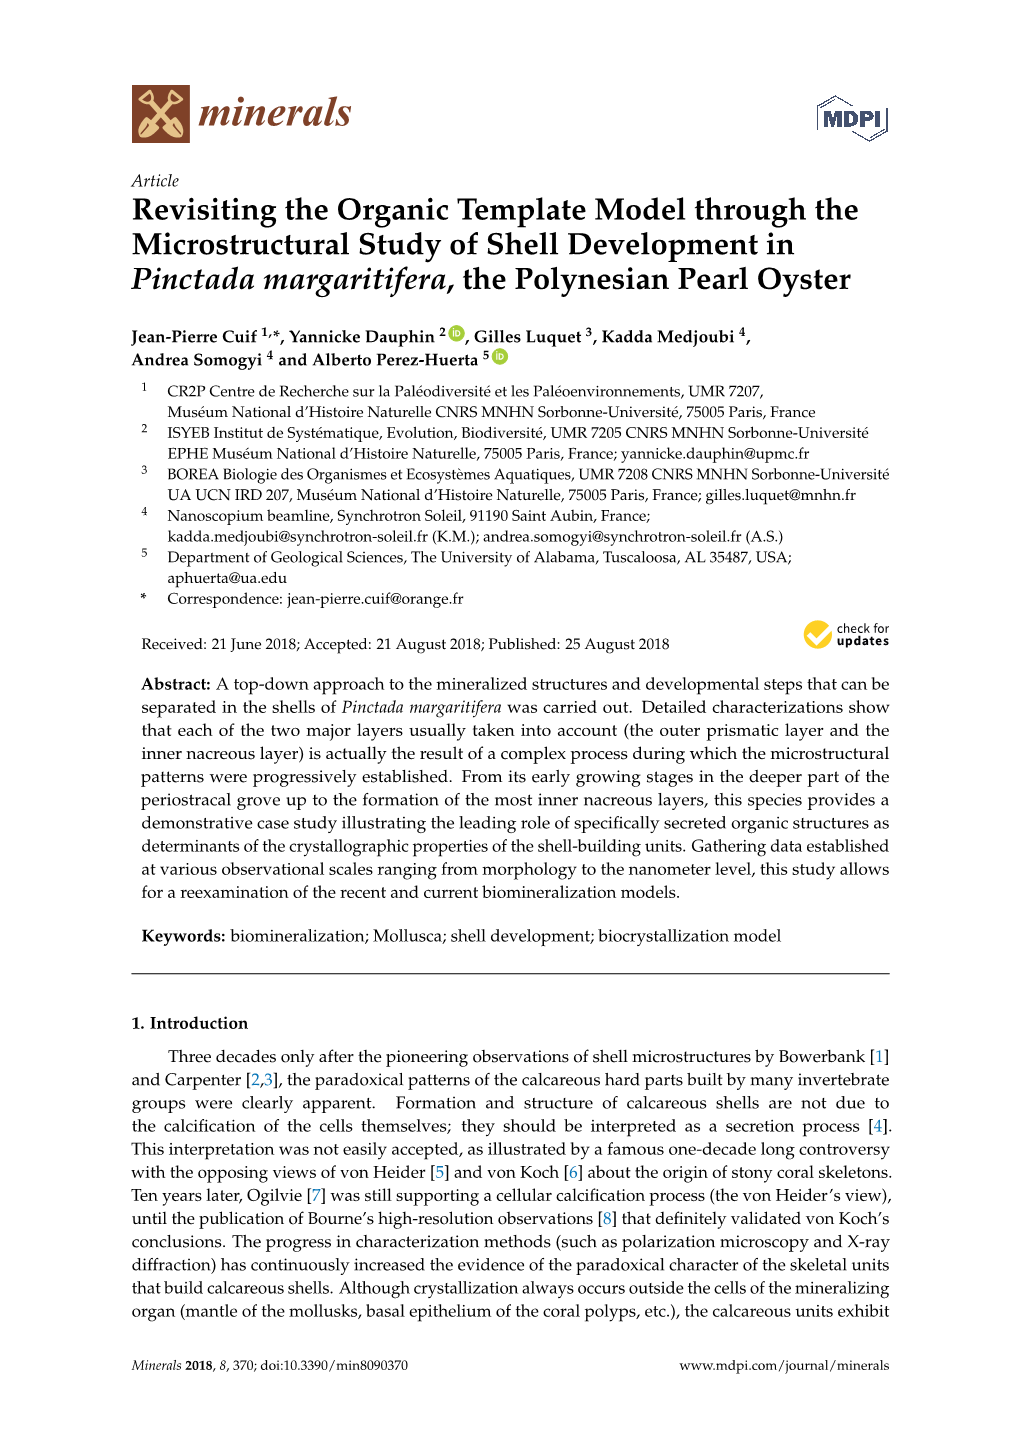 Revisiting the Organic Template Model Through the Microstructural Study of Shell Development in Pinctada Margaritifera, the Polynesian Pearl Oyster